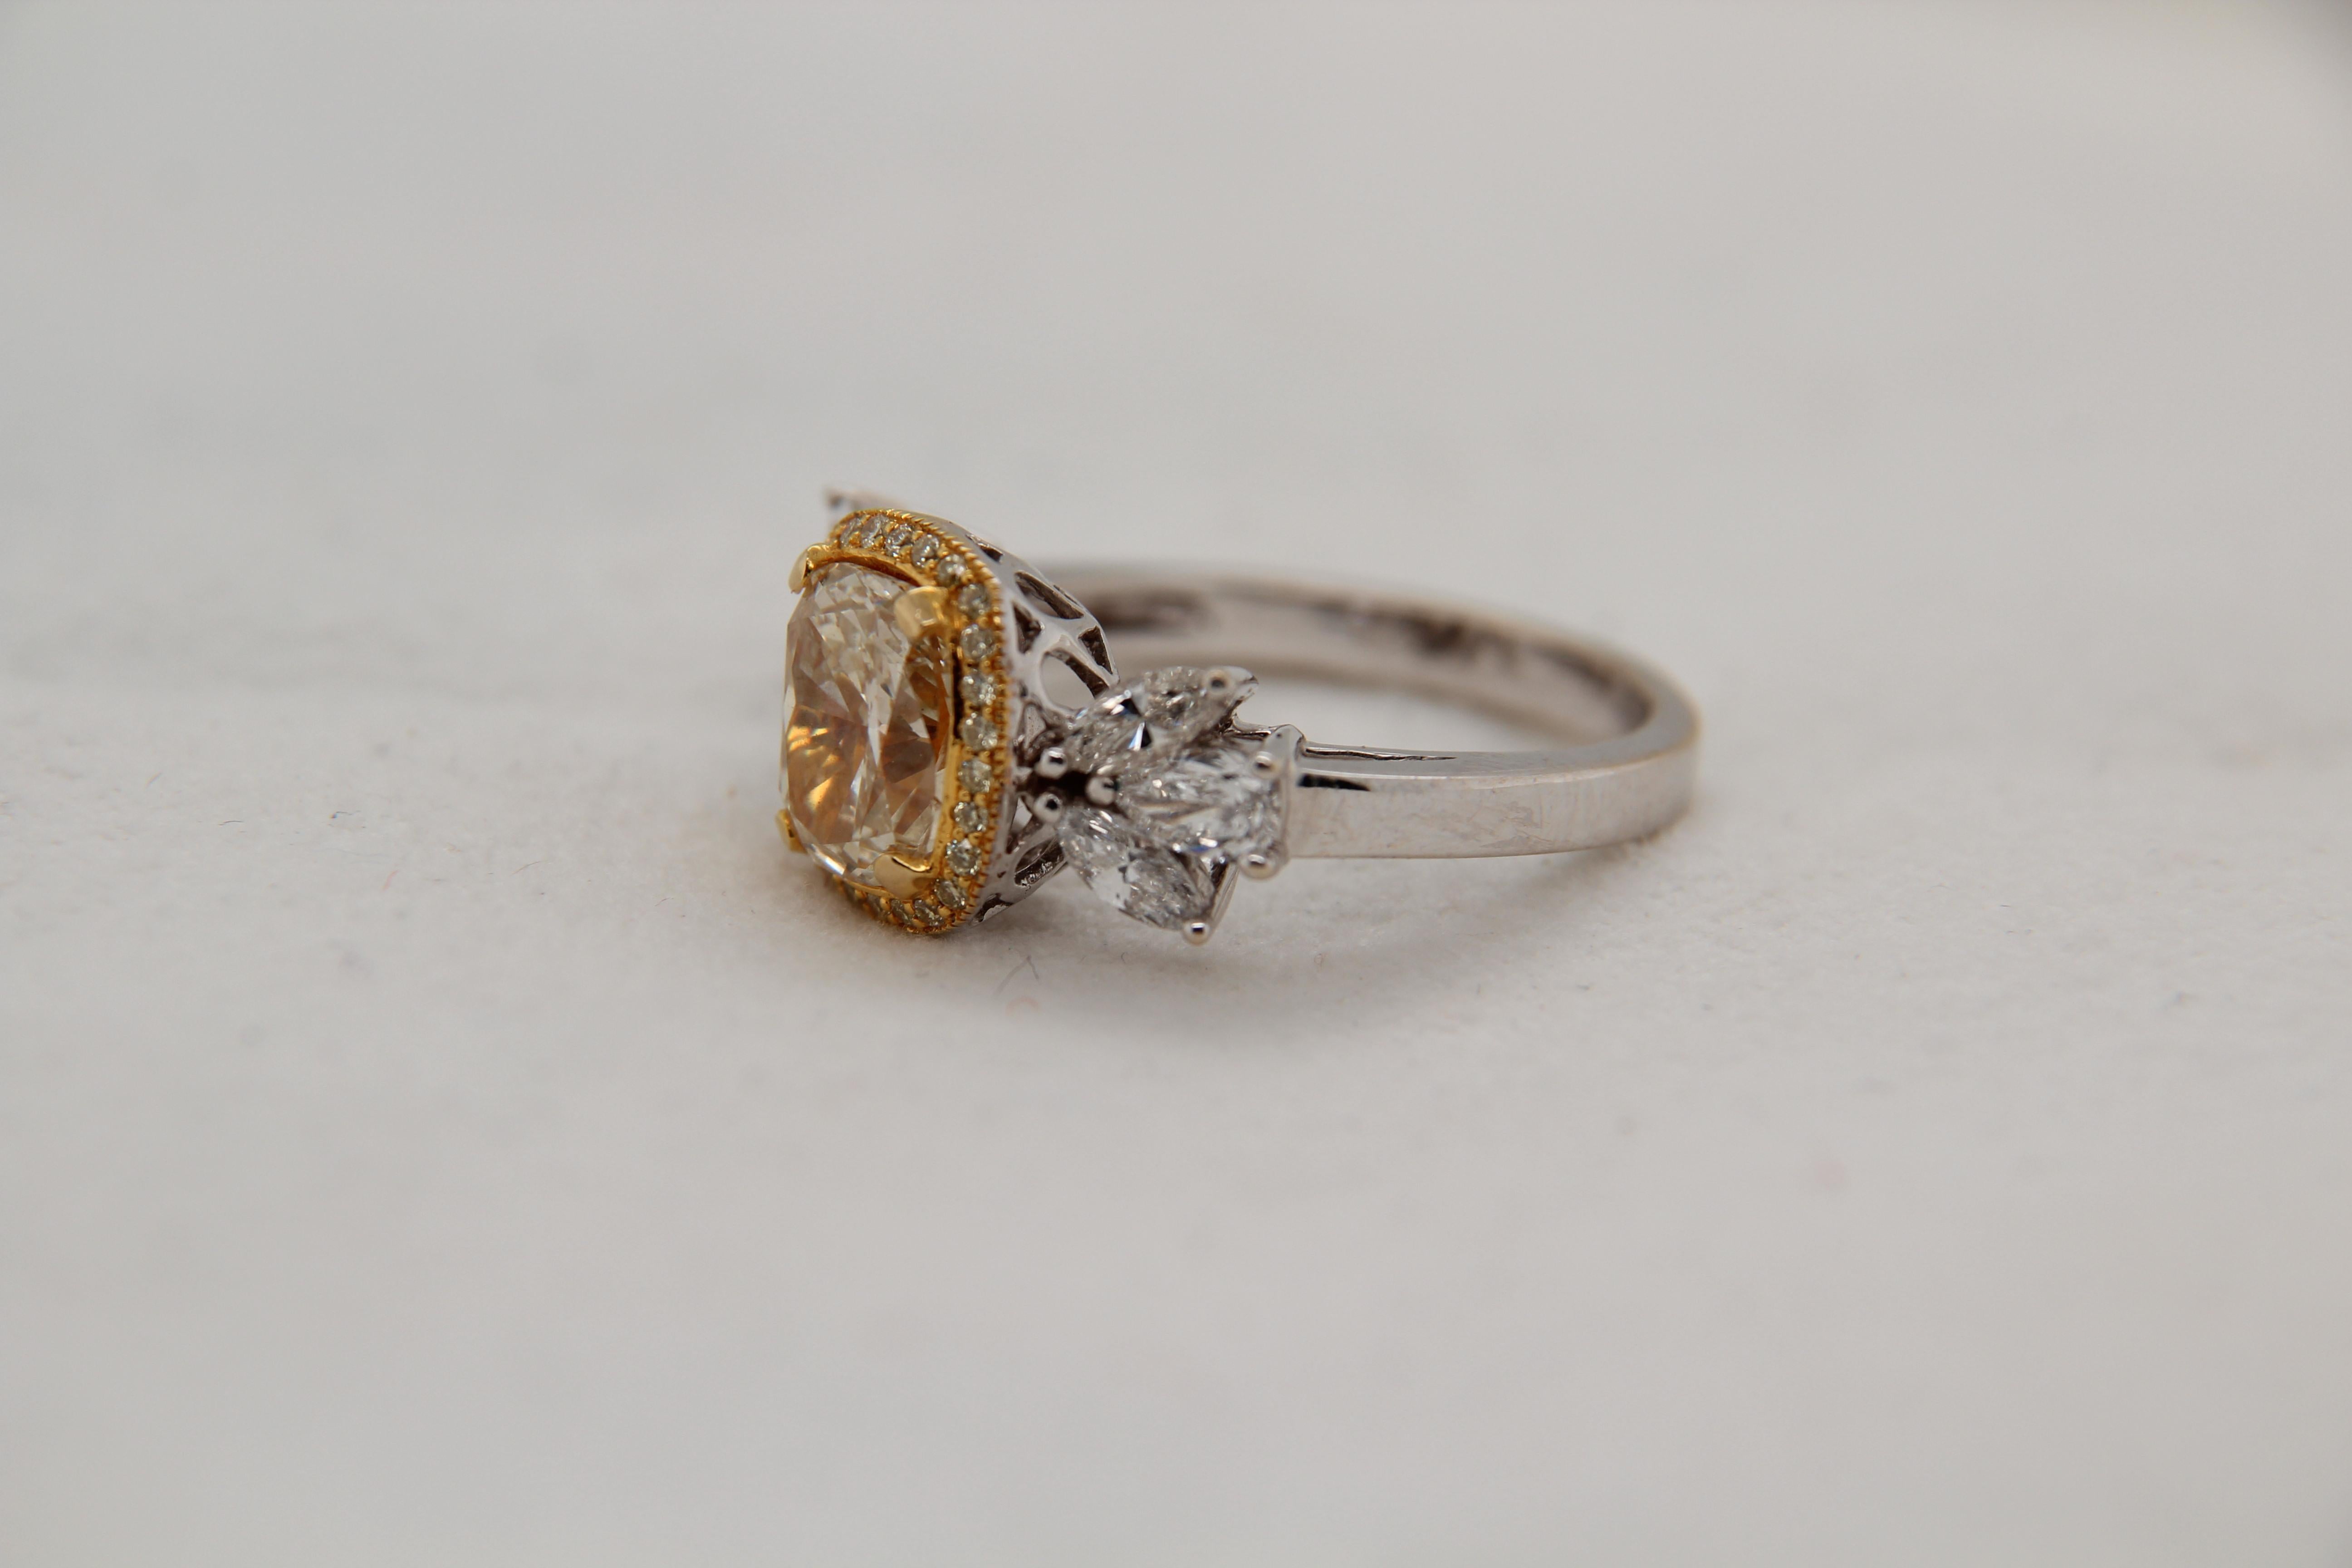 A brand new 2.17 carat fancy yellow diamond ring in 18 karat gold. The centre diamond weigh 2.17 carat and total diamond weight 3.09 carat. The total weight of ring is 6.53 grams.